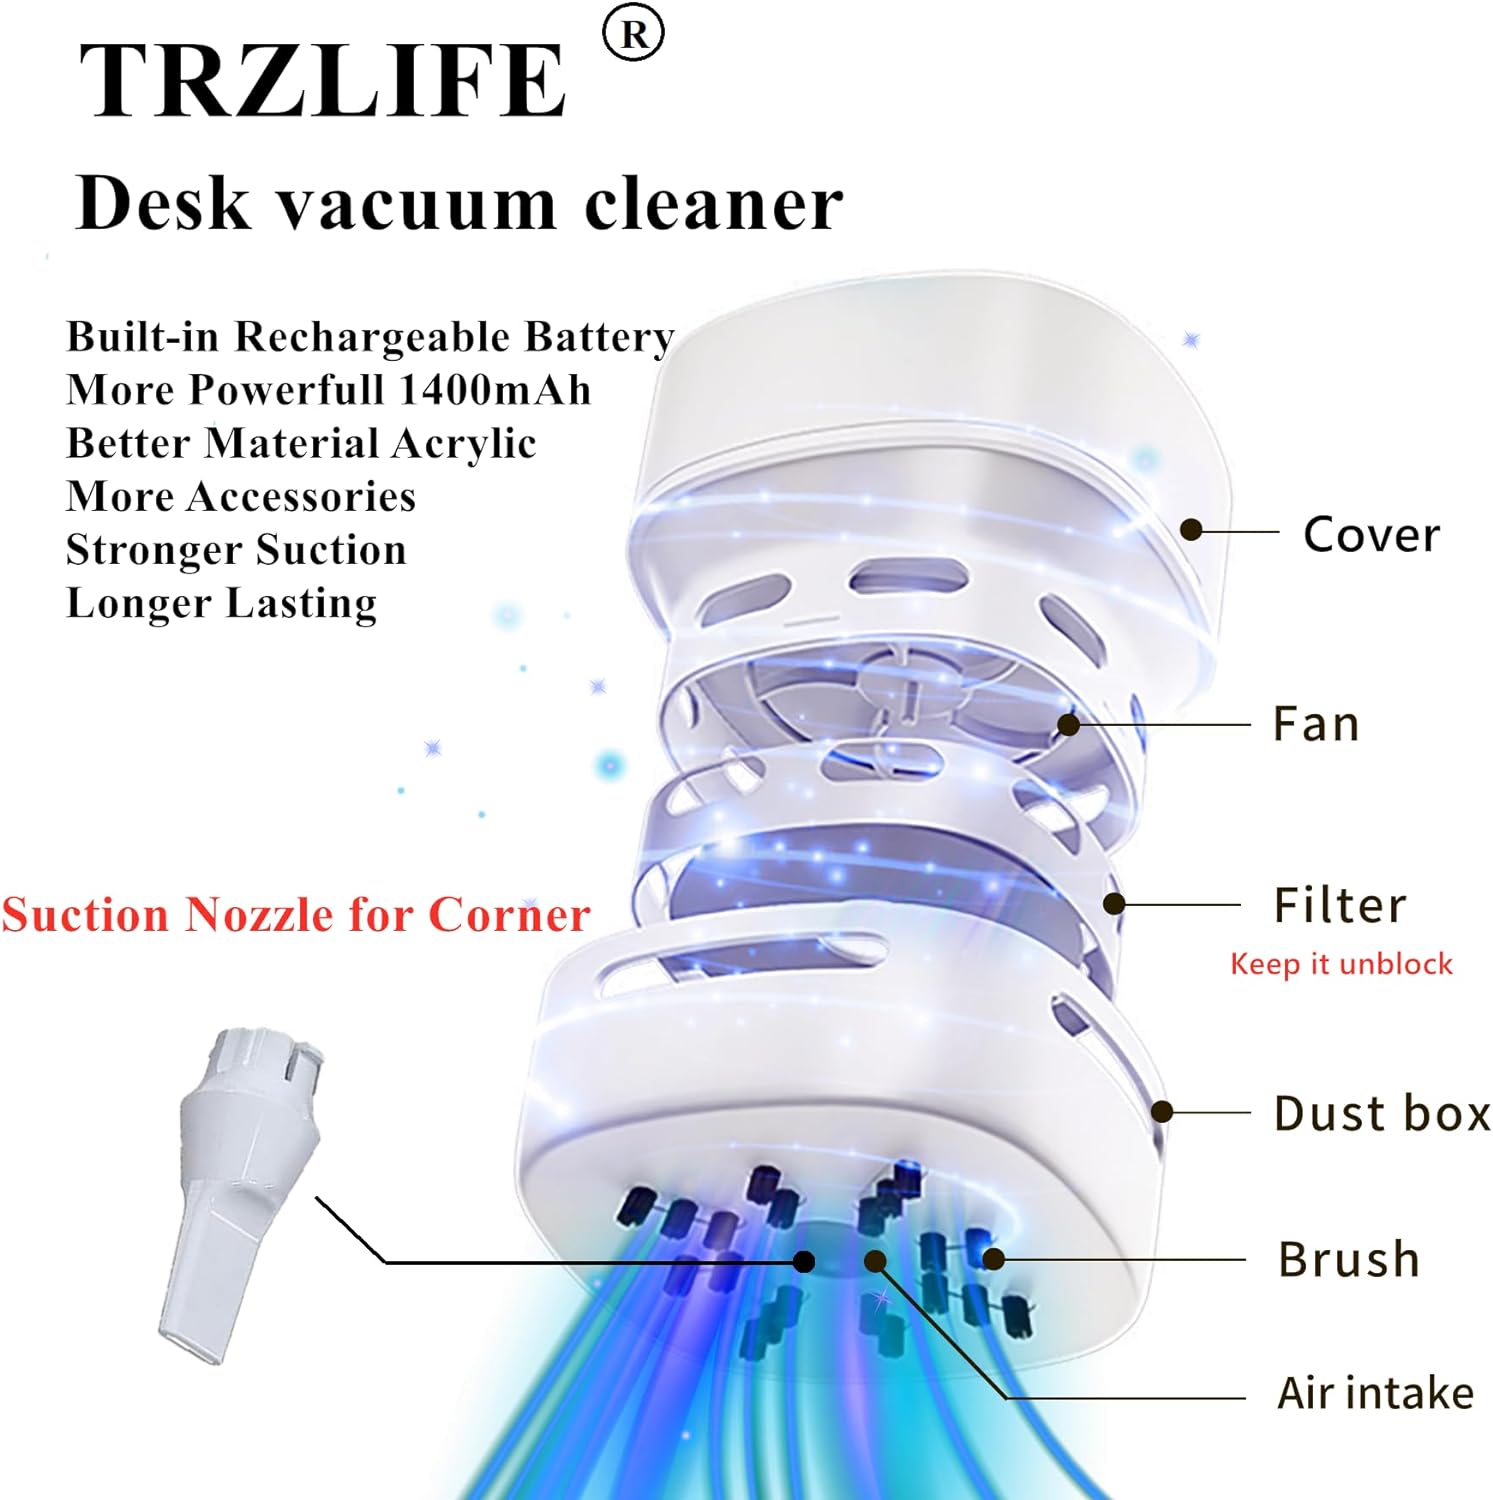 Trzlife Desk Vacuum Cleaner, Upgraded Mini Table Vacuum Improved Details Higher Suction More Durable Rechargeable Energy Saving Mini Vac Picks Up Tiny Items Crumbs Flakes For Desktop Drawer Countertop